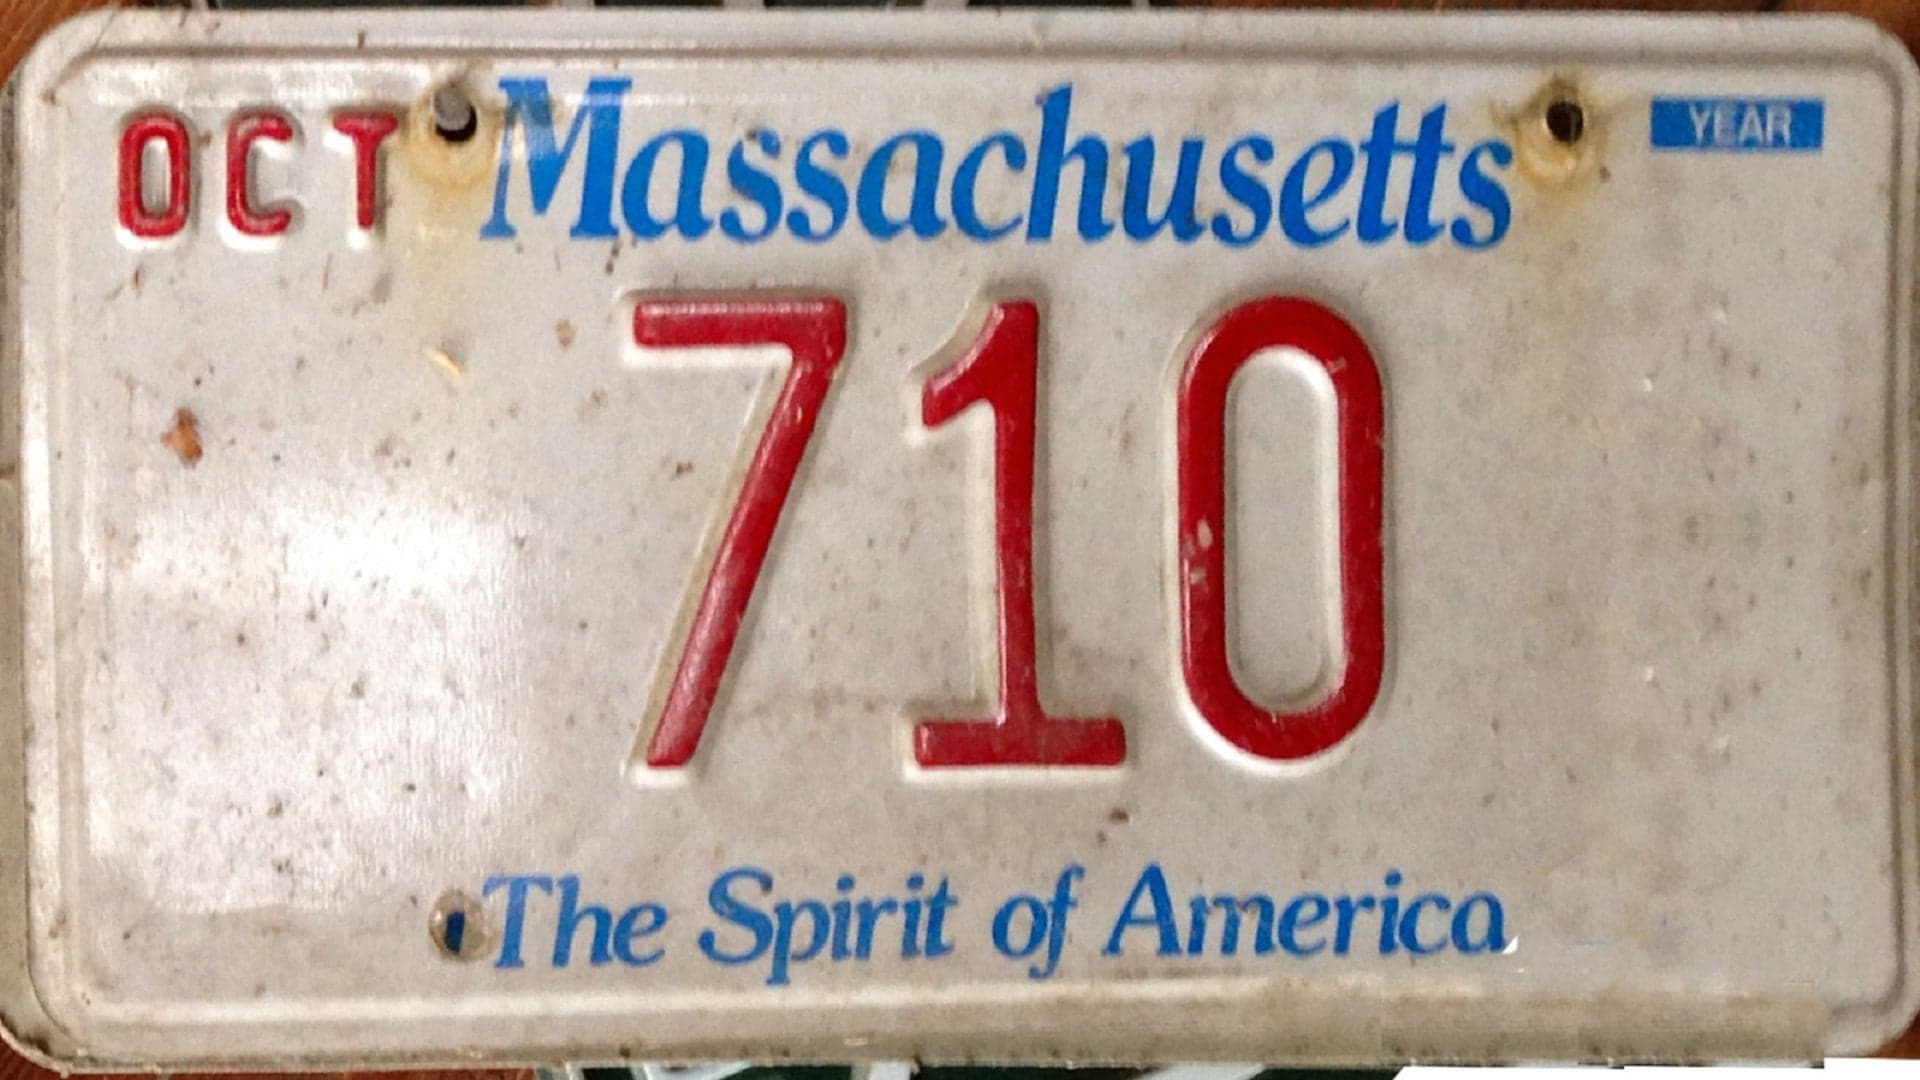 Massachusetts’ Obsession With Low Number License Plates